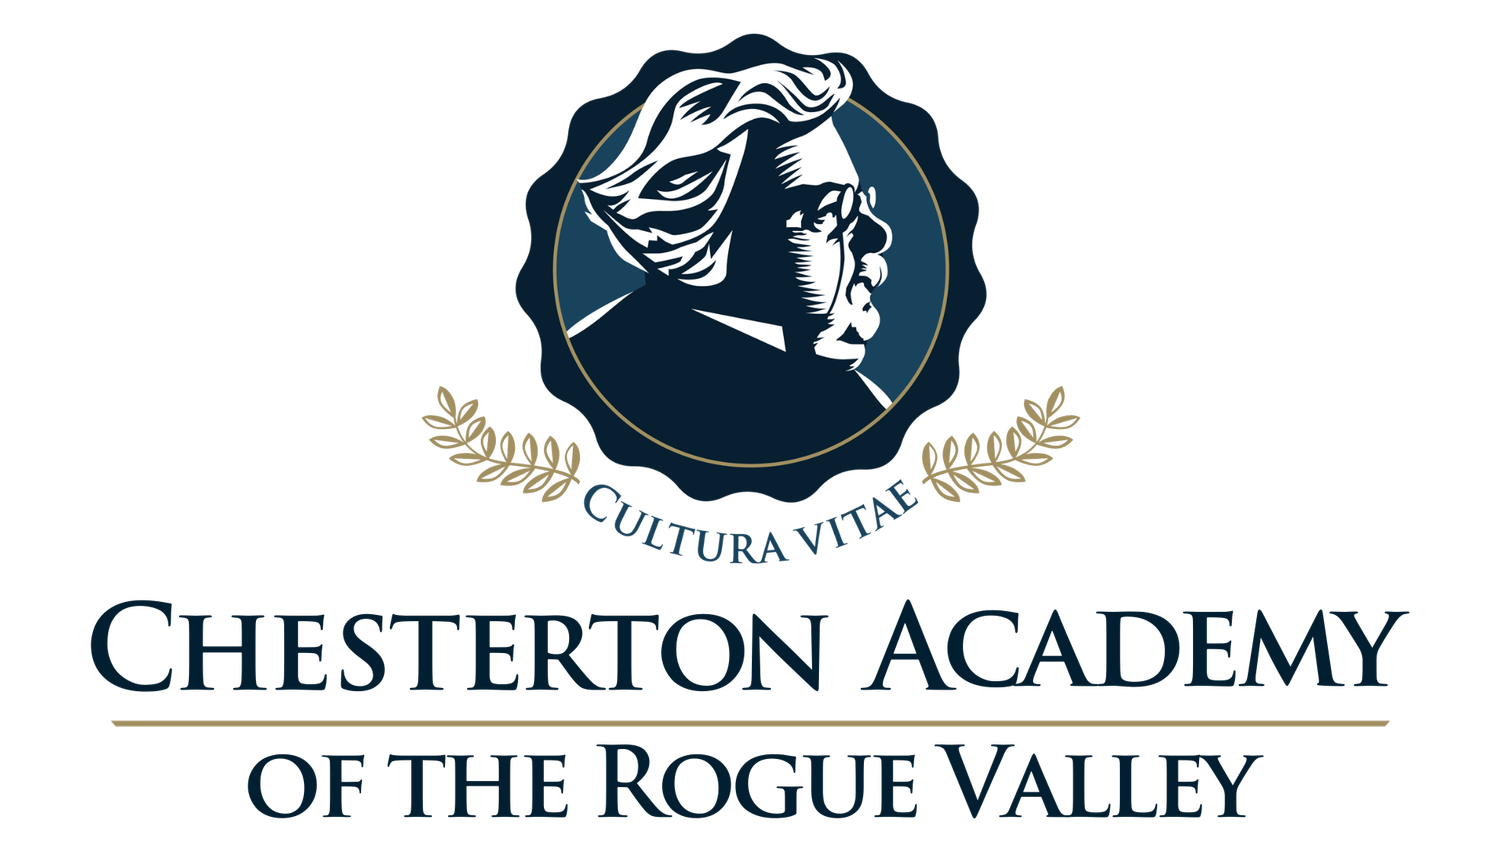 Chesterton Academy of the Rogue Valley